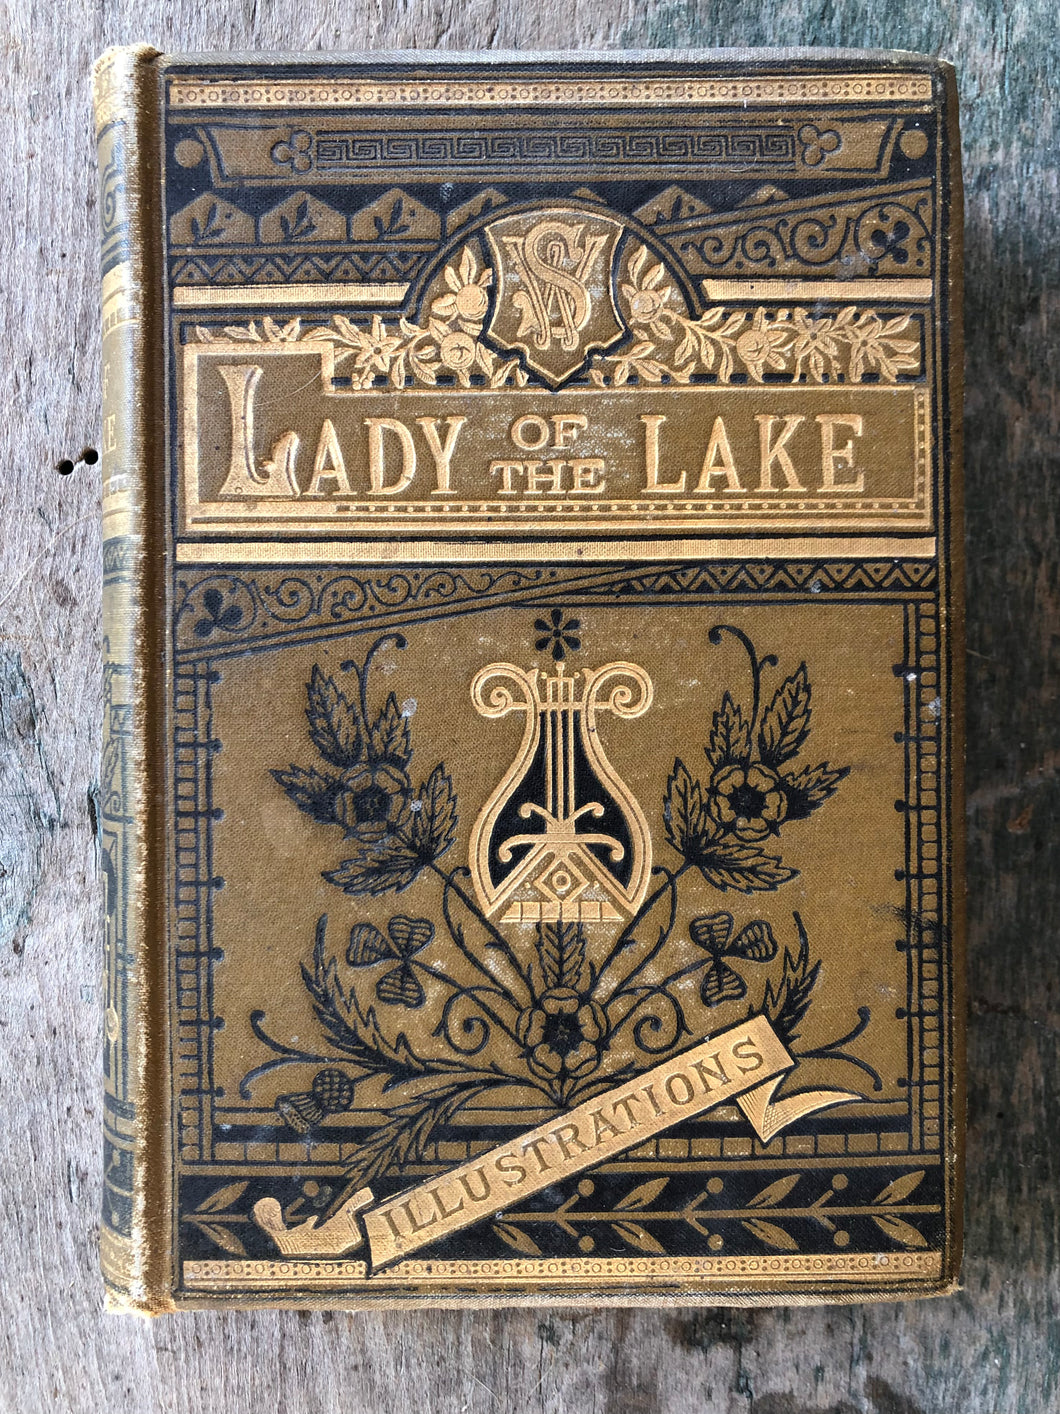 The Lady of the Lake. A Poem. by Sir Walter Scott